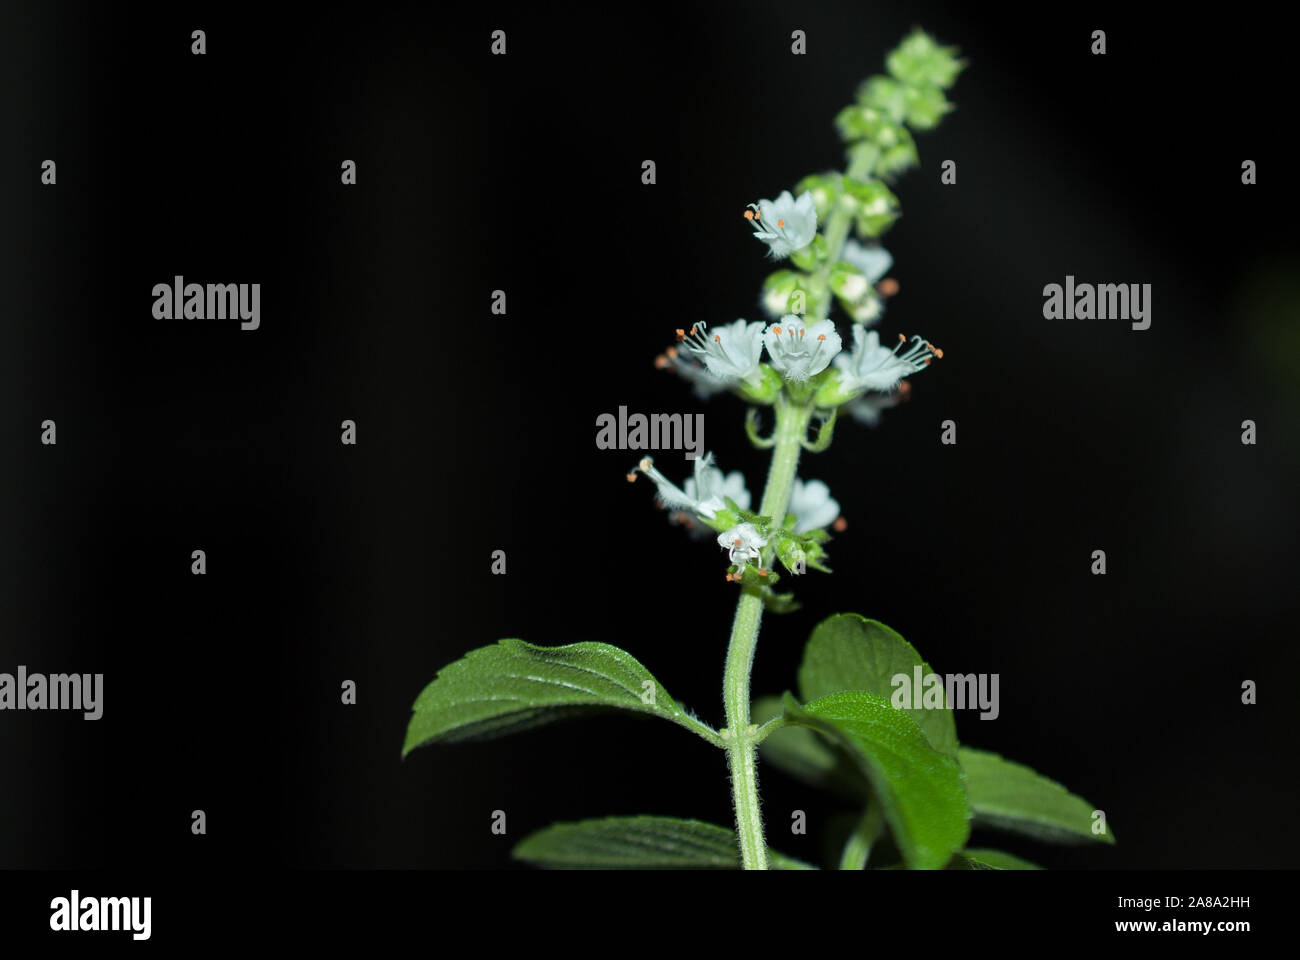 basil flower with black background for text Stock Photo